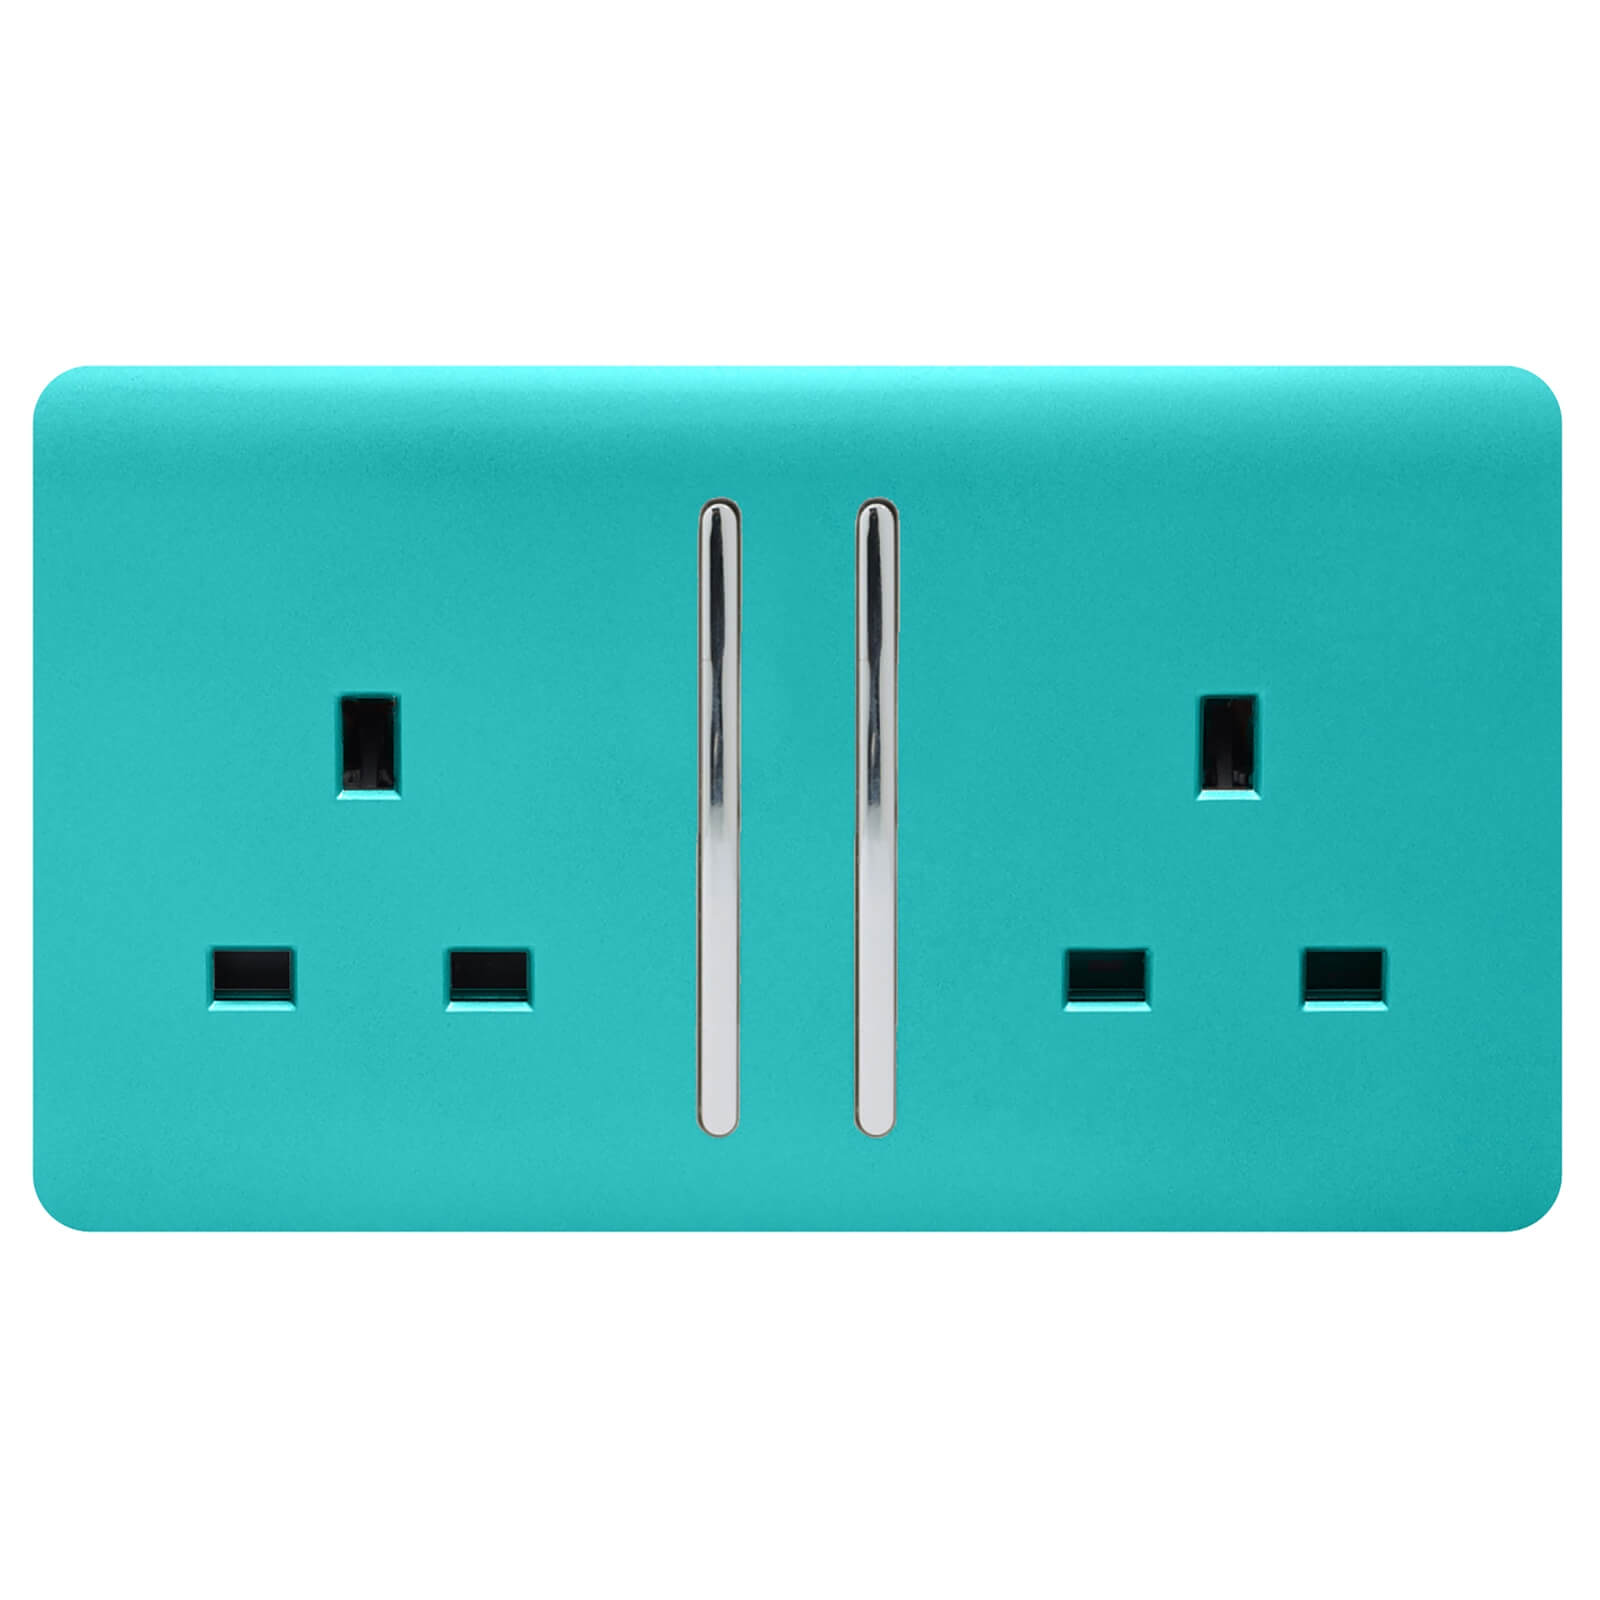 Trendi Switch 2 Gang 13Amp Long Switched Socket in Bright Teal